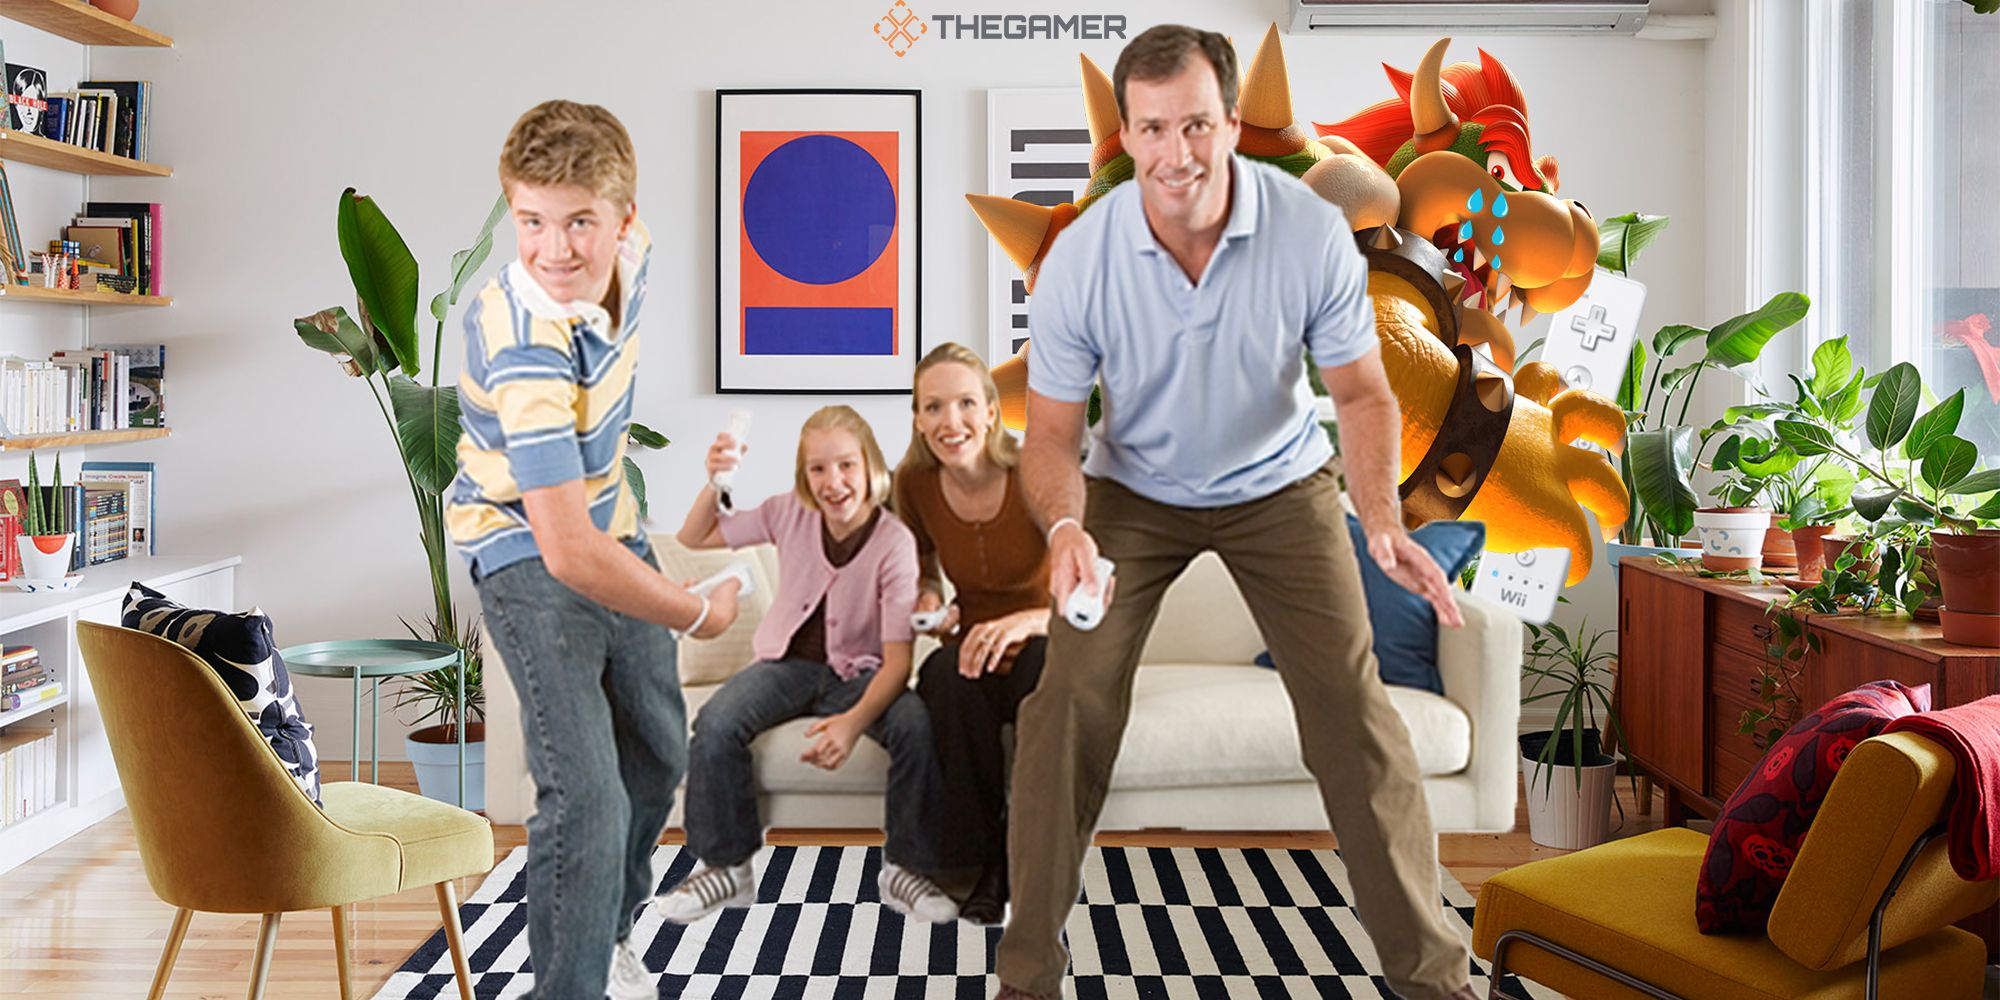 A happy family play Wii bowling in their living room while Bowser sulks in the corner because he sucks at Wii bowling.